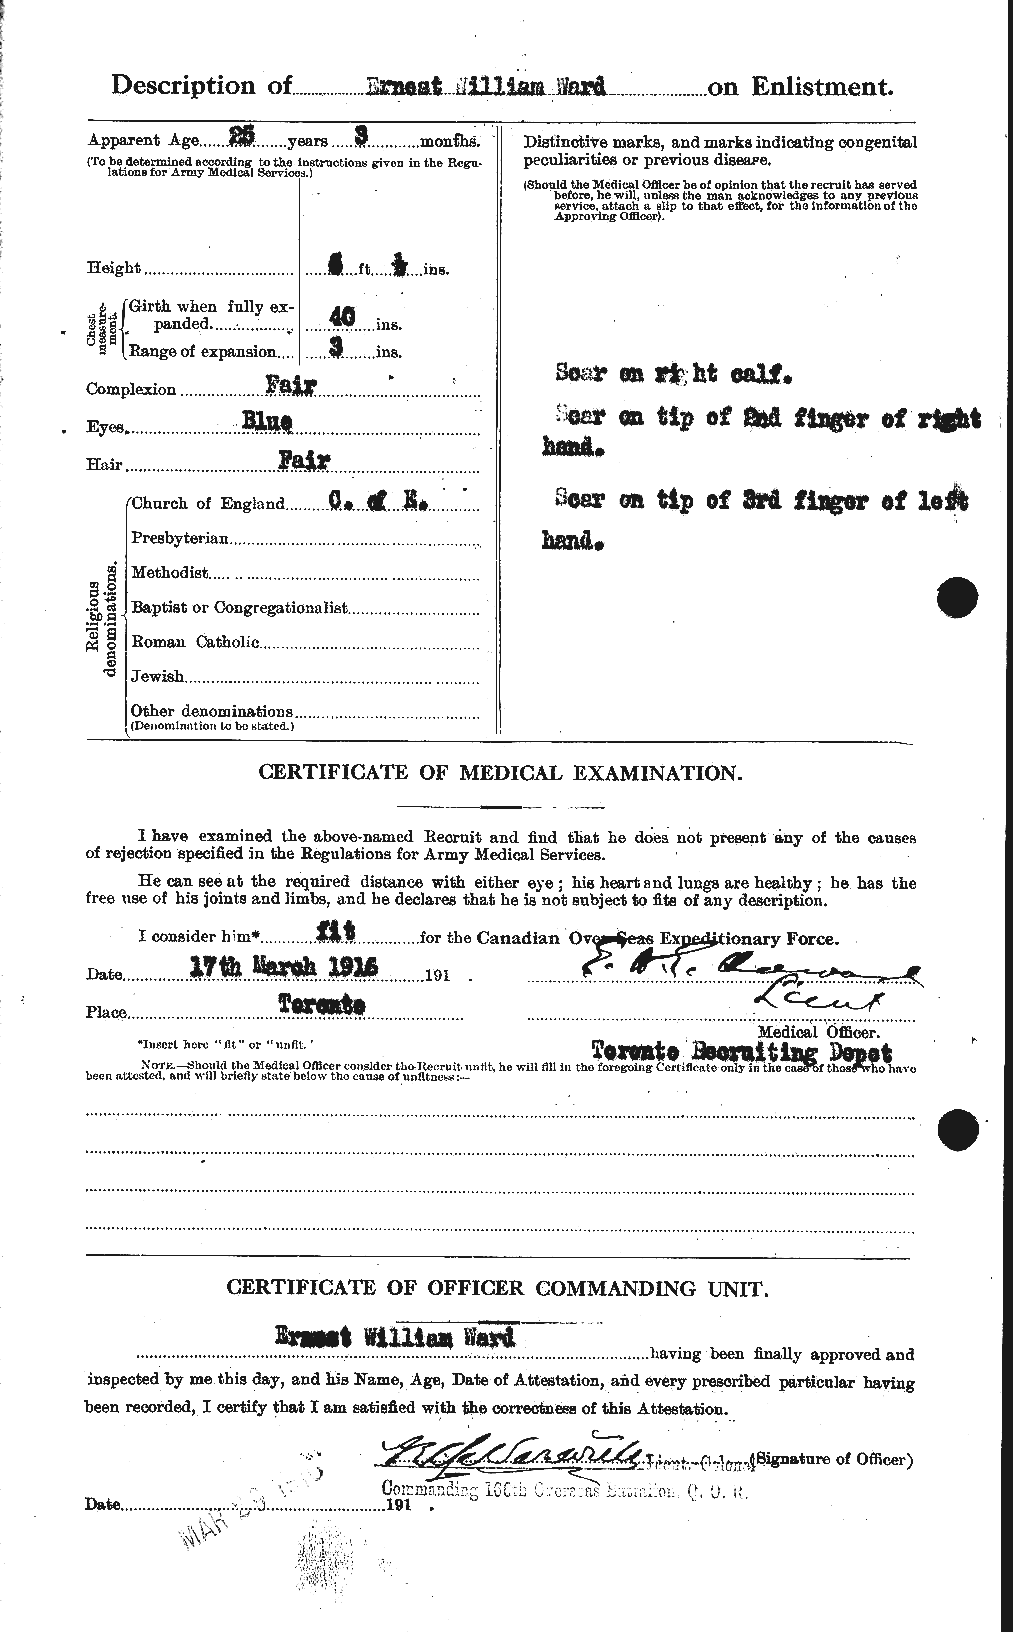 Personnel Records of the First World War - CEF 657674b